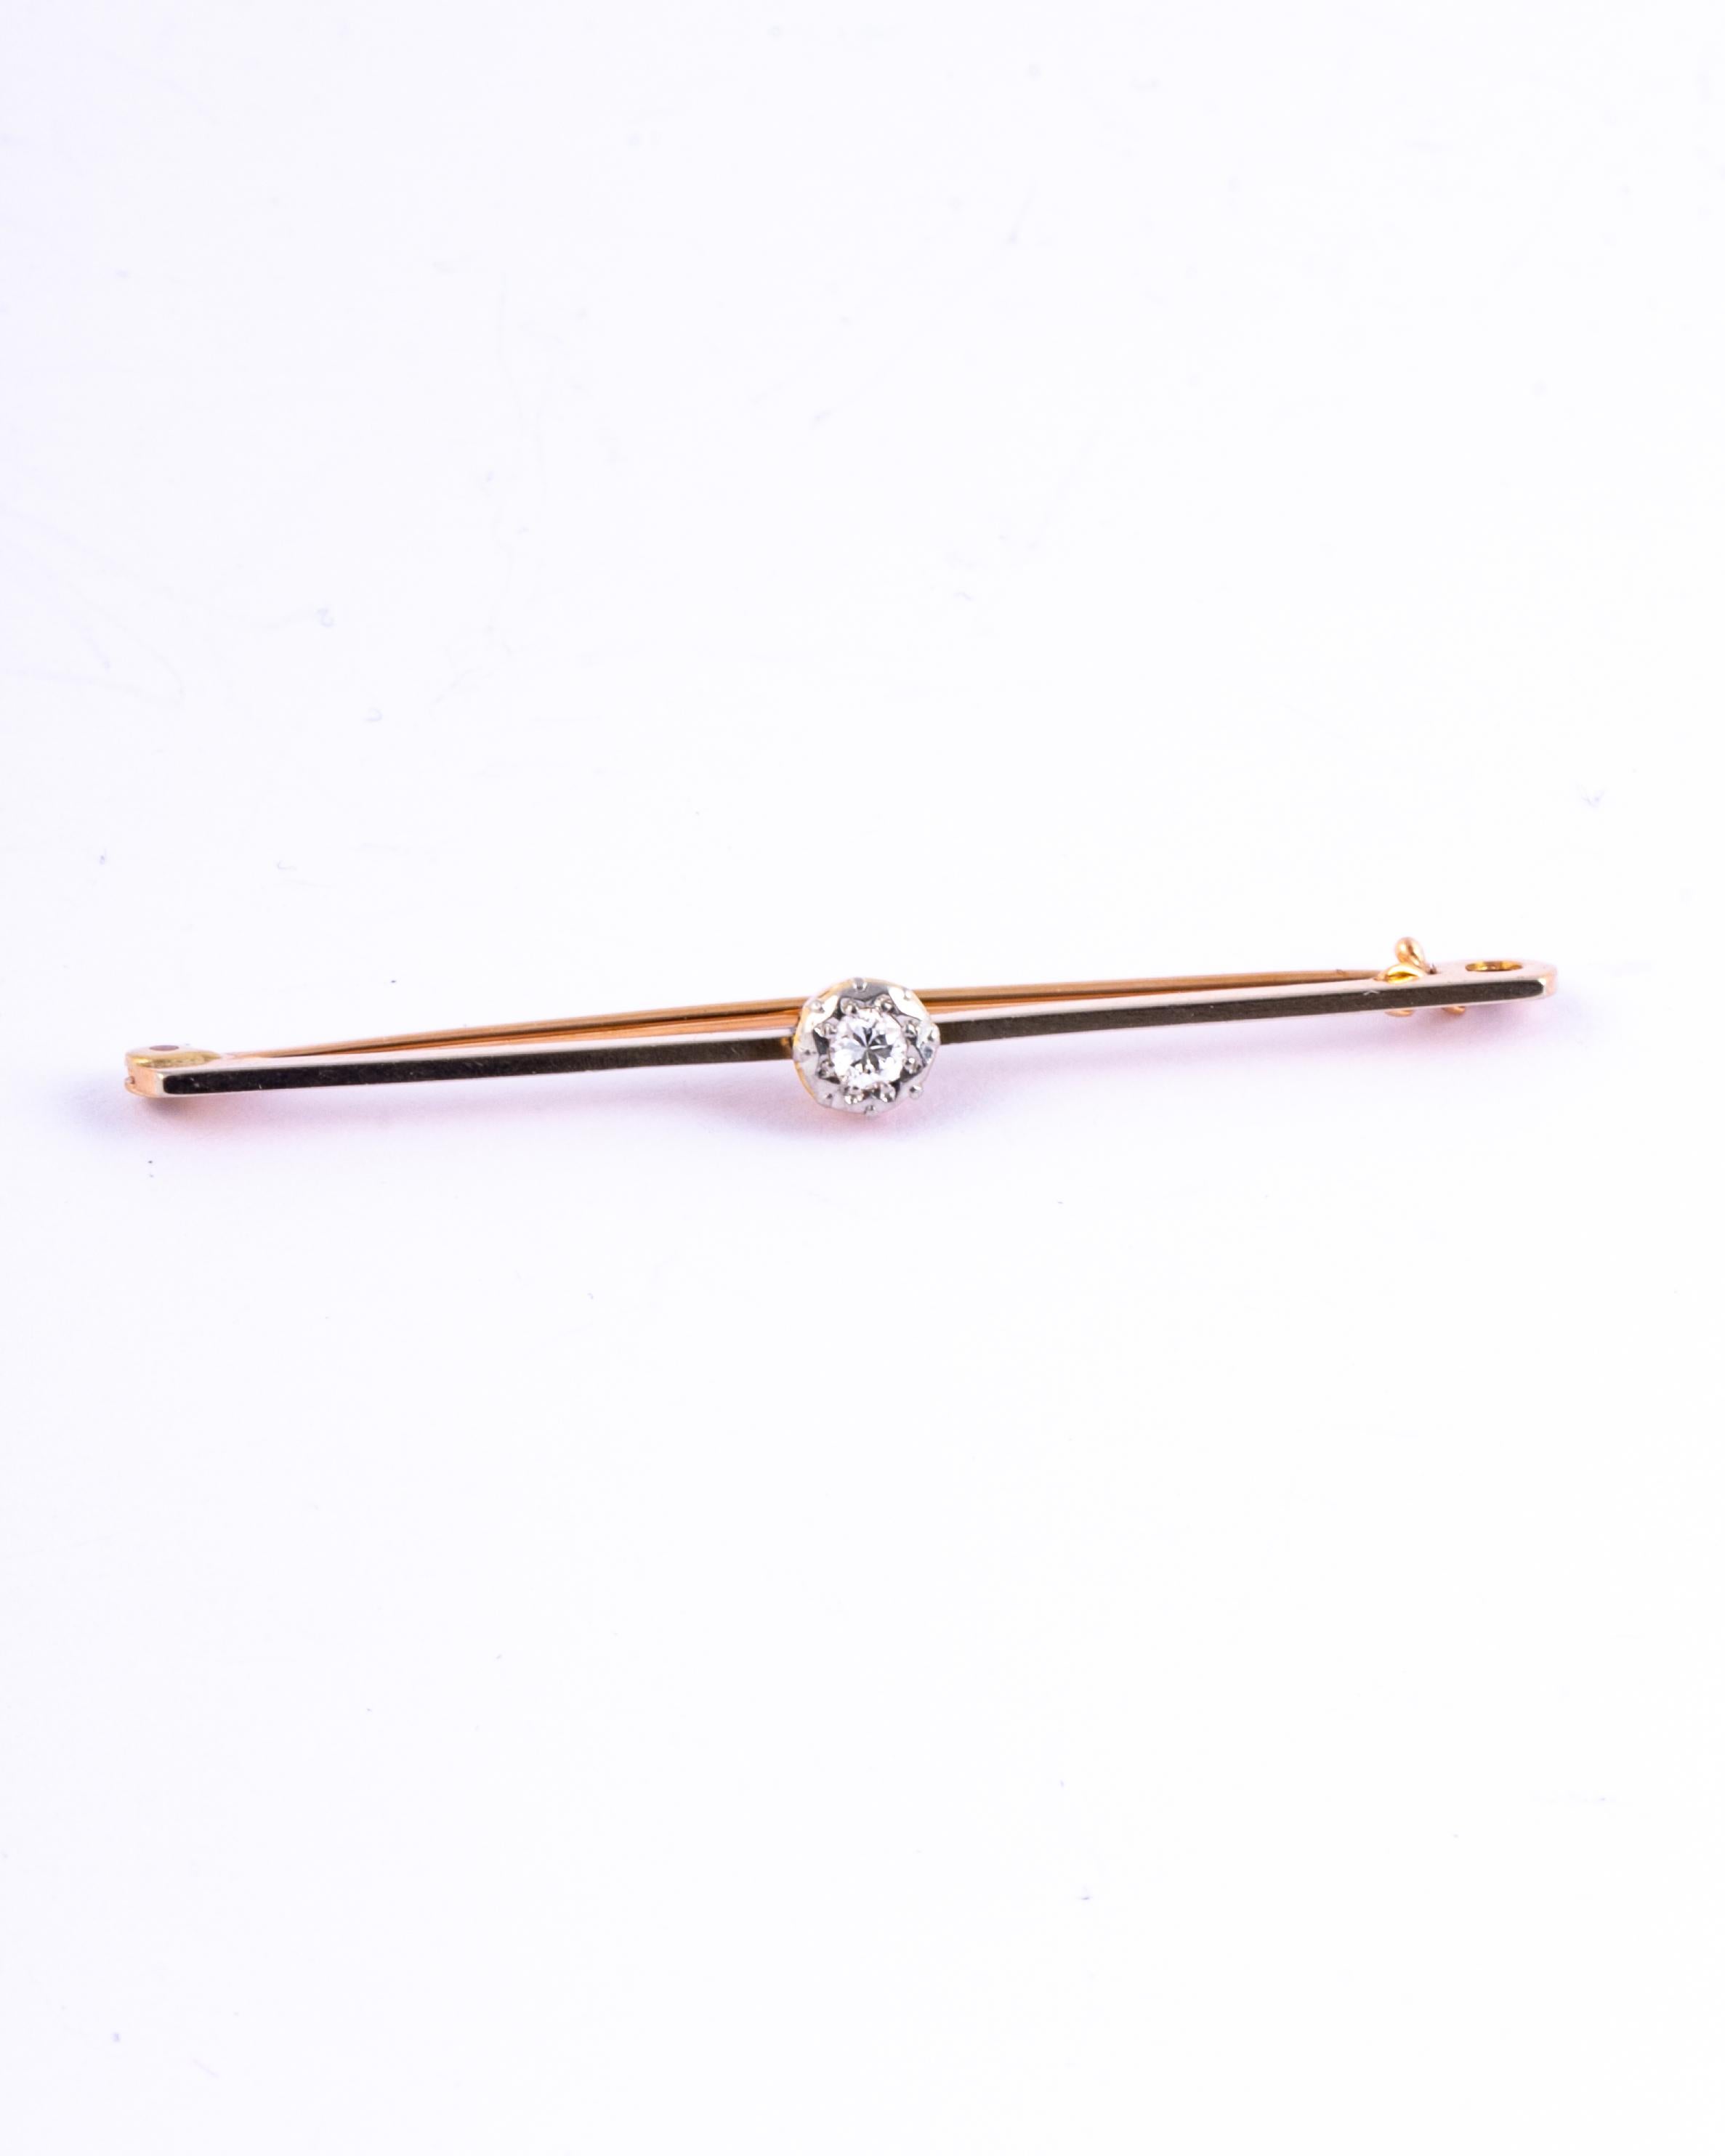 This gorgeous pin is modelled in 9 carat golden has a simple and classic design. The diamond measures 15pts and is set in platinum. 

Length: 52mm

Weight: 1.8g